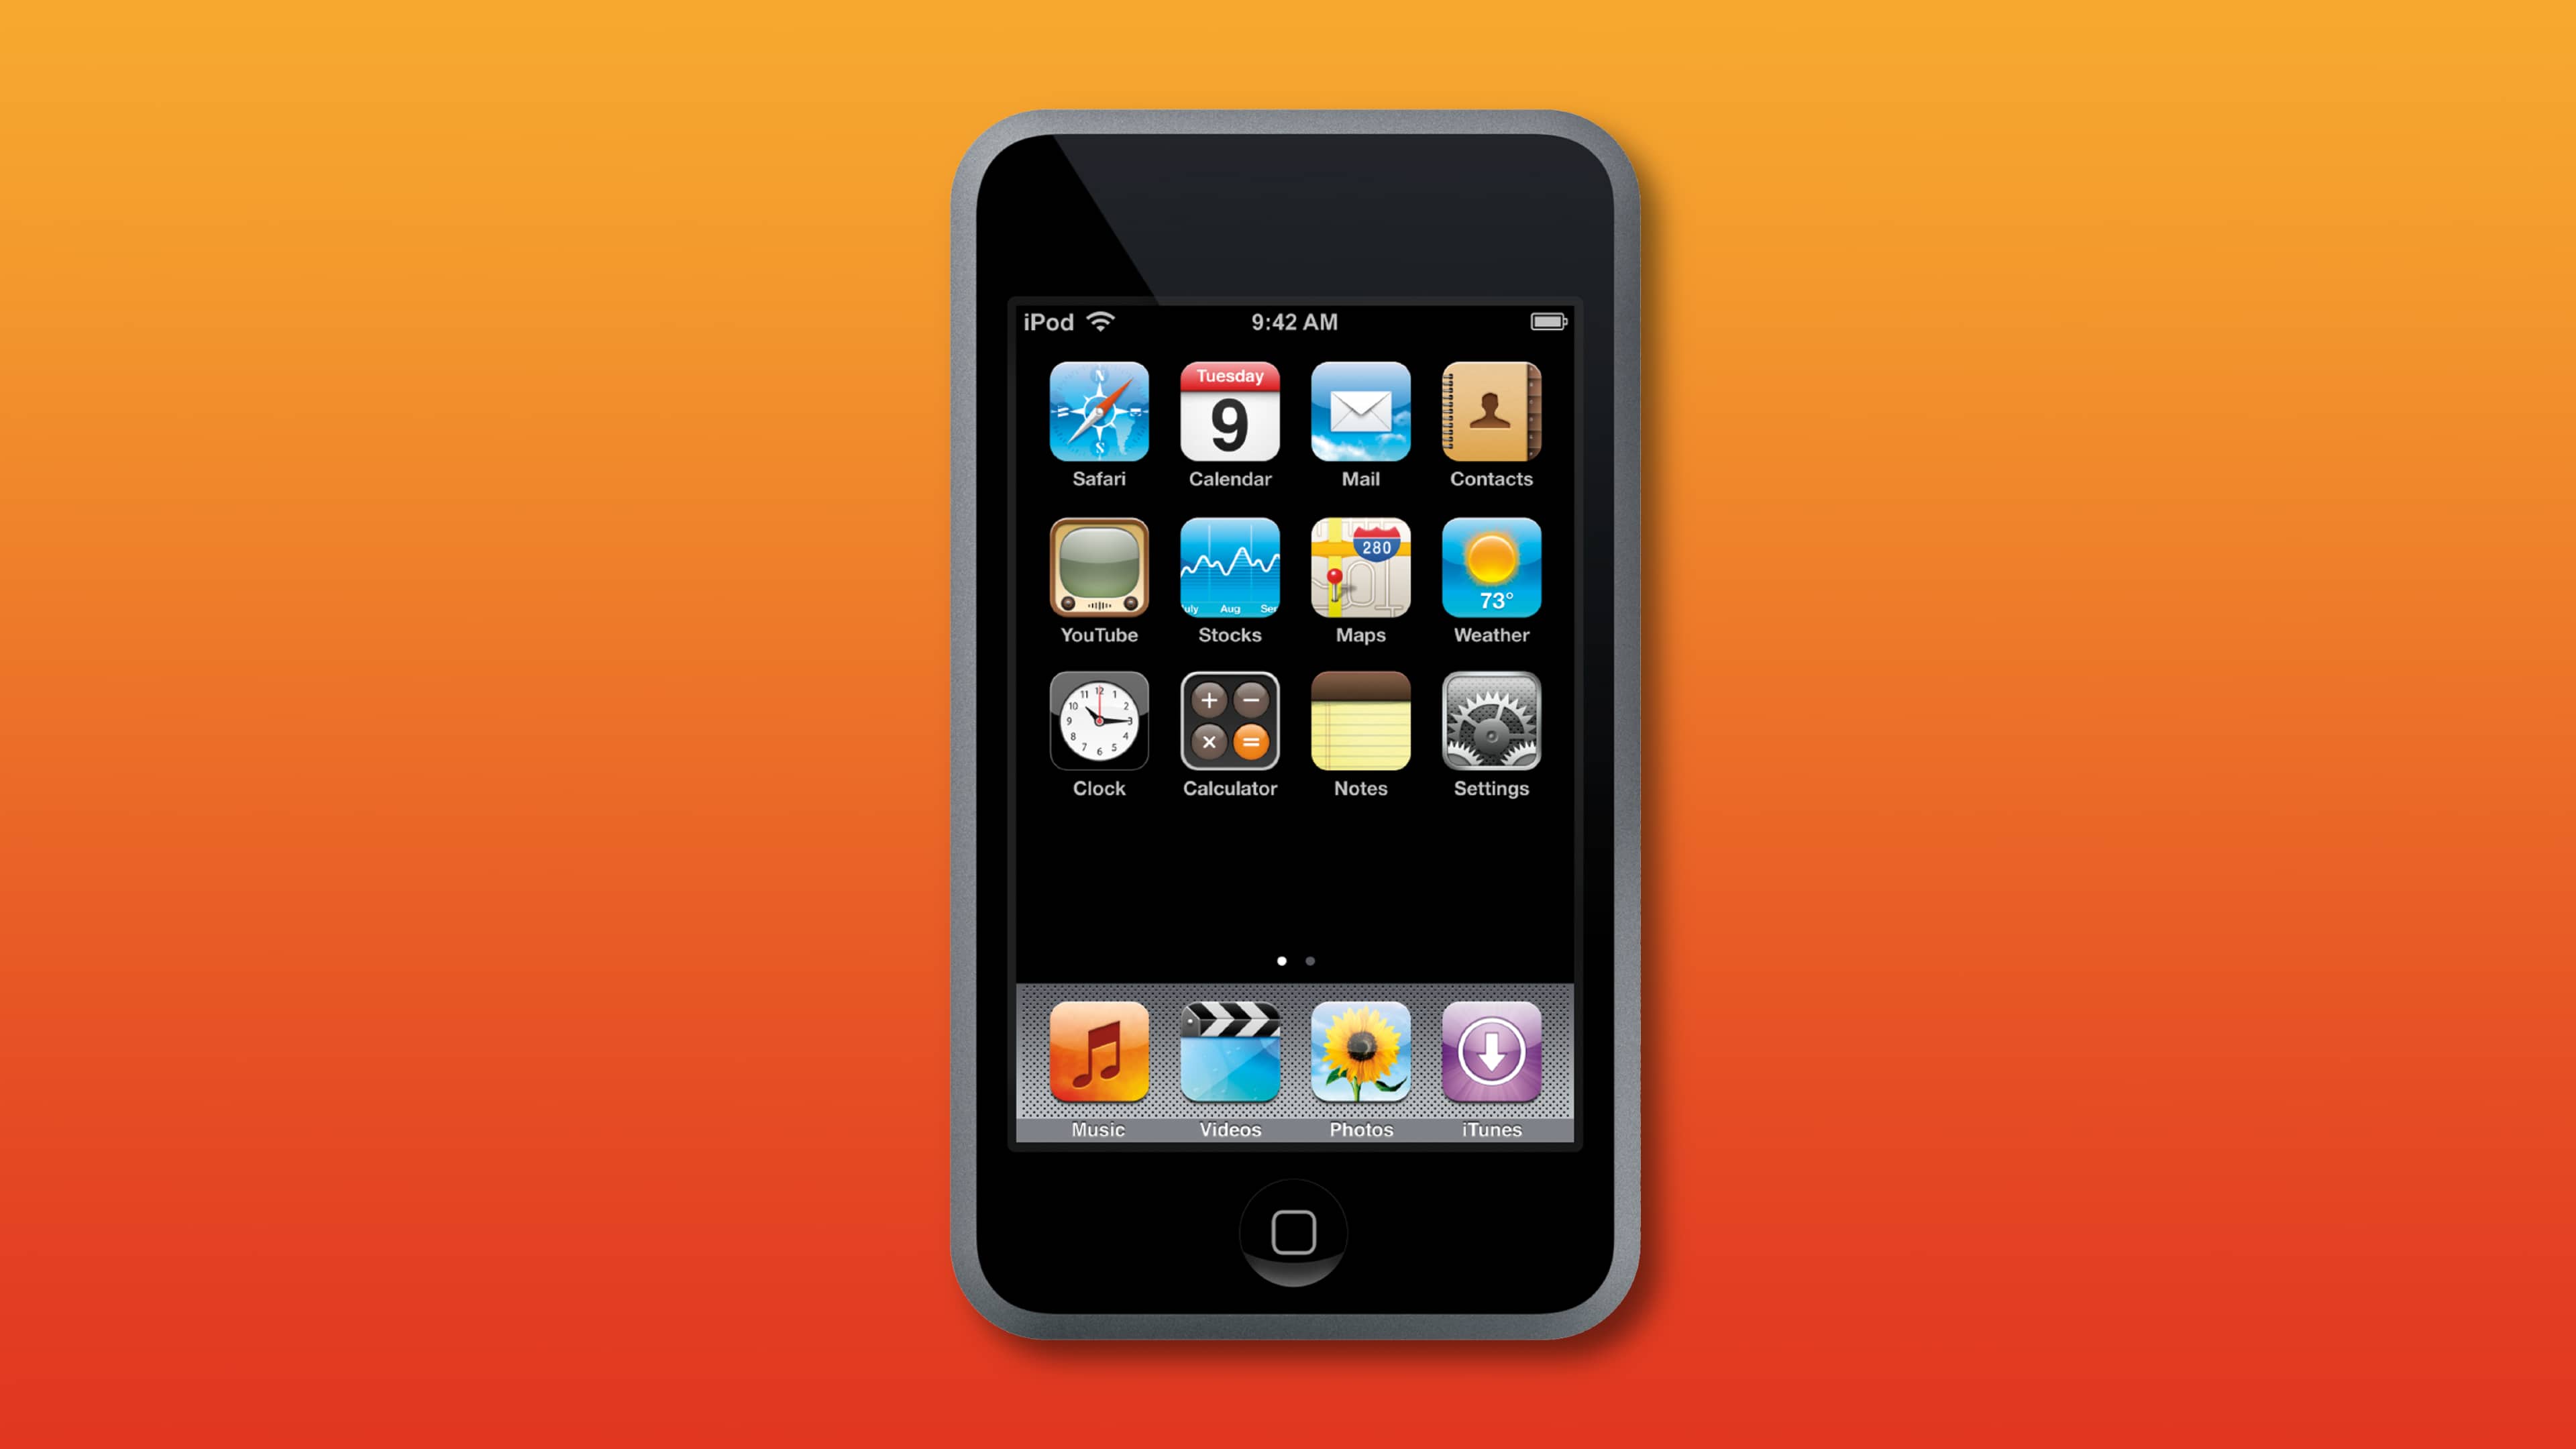 Apple's marketing image showing the front of the iPod music player, the original model released in 2001, set against a colorful gradient background